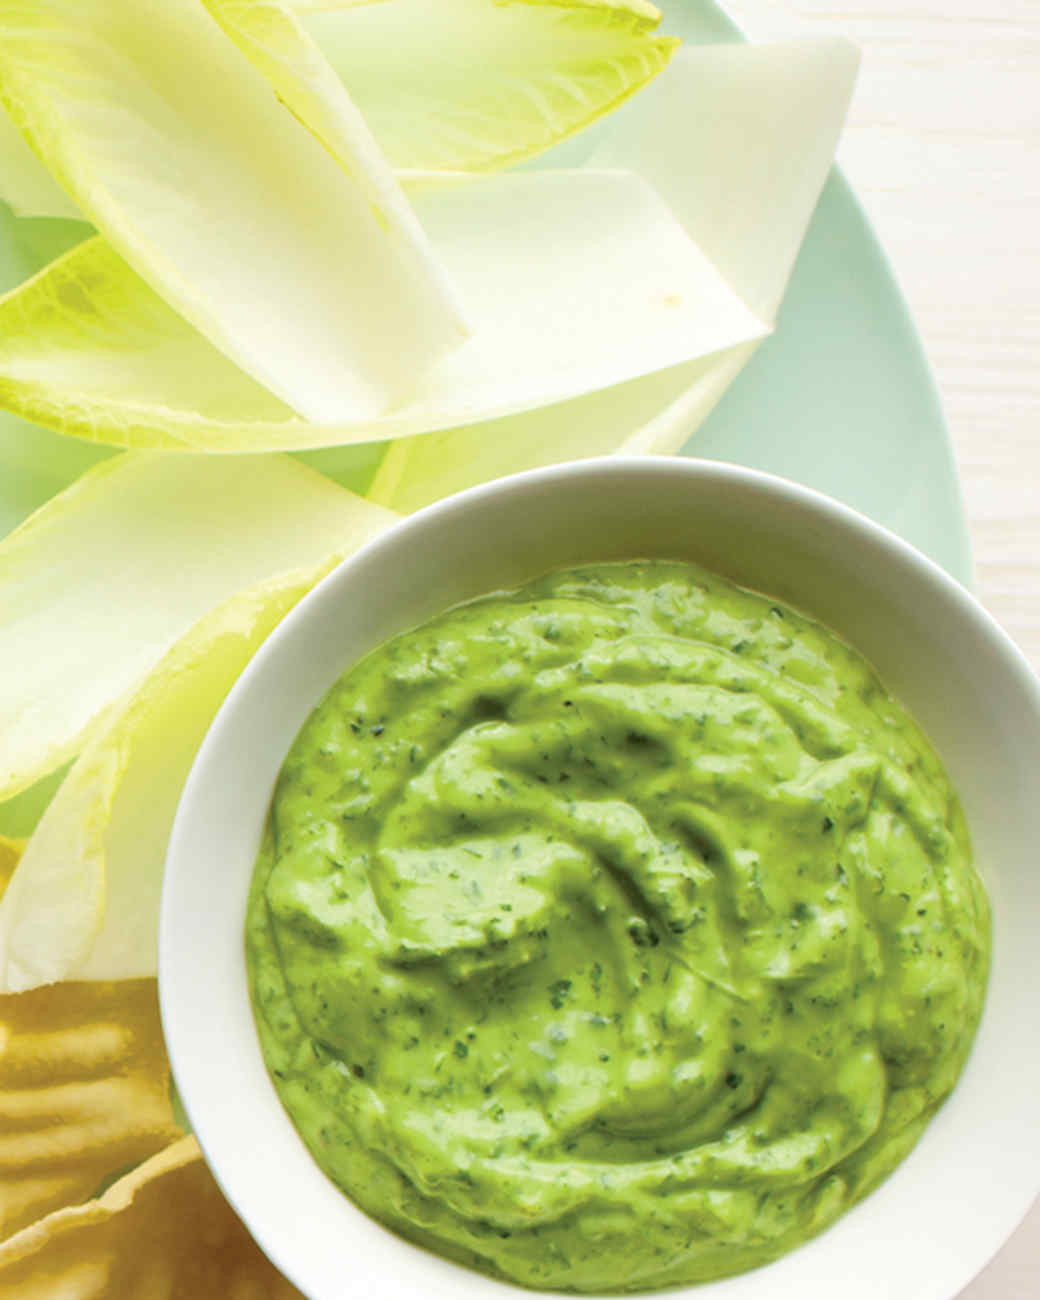 Green Goddess Dip with Endive